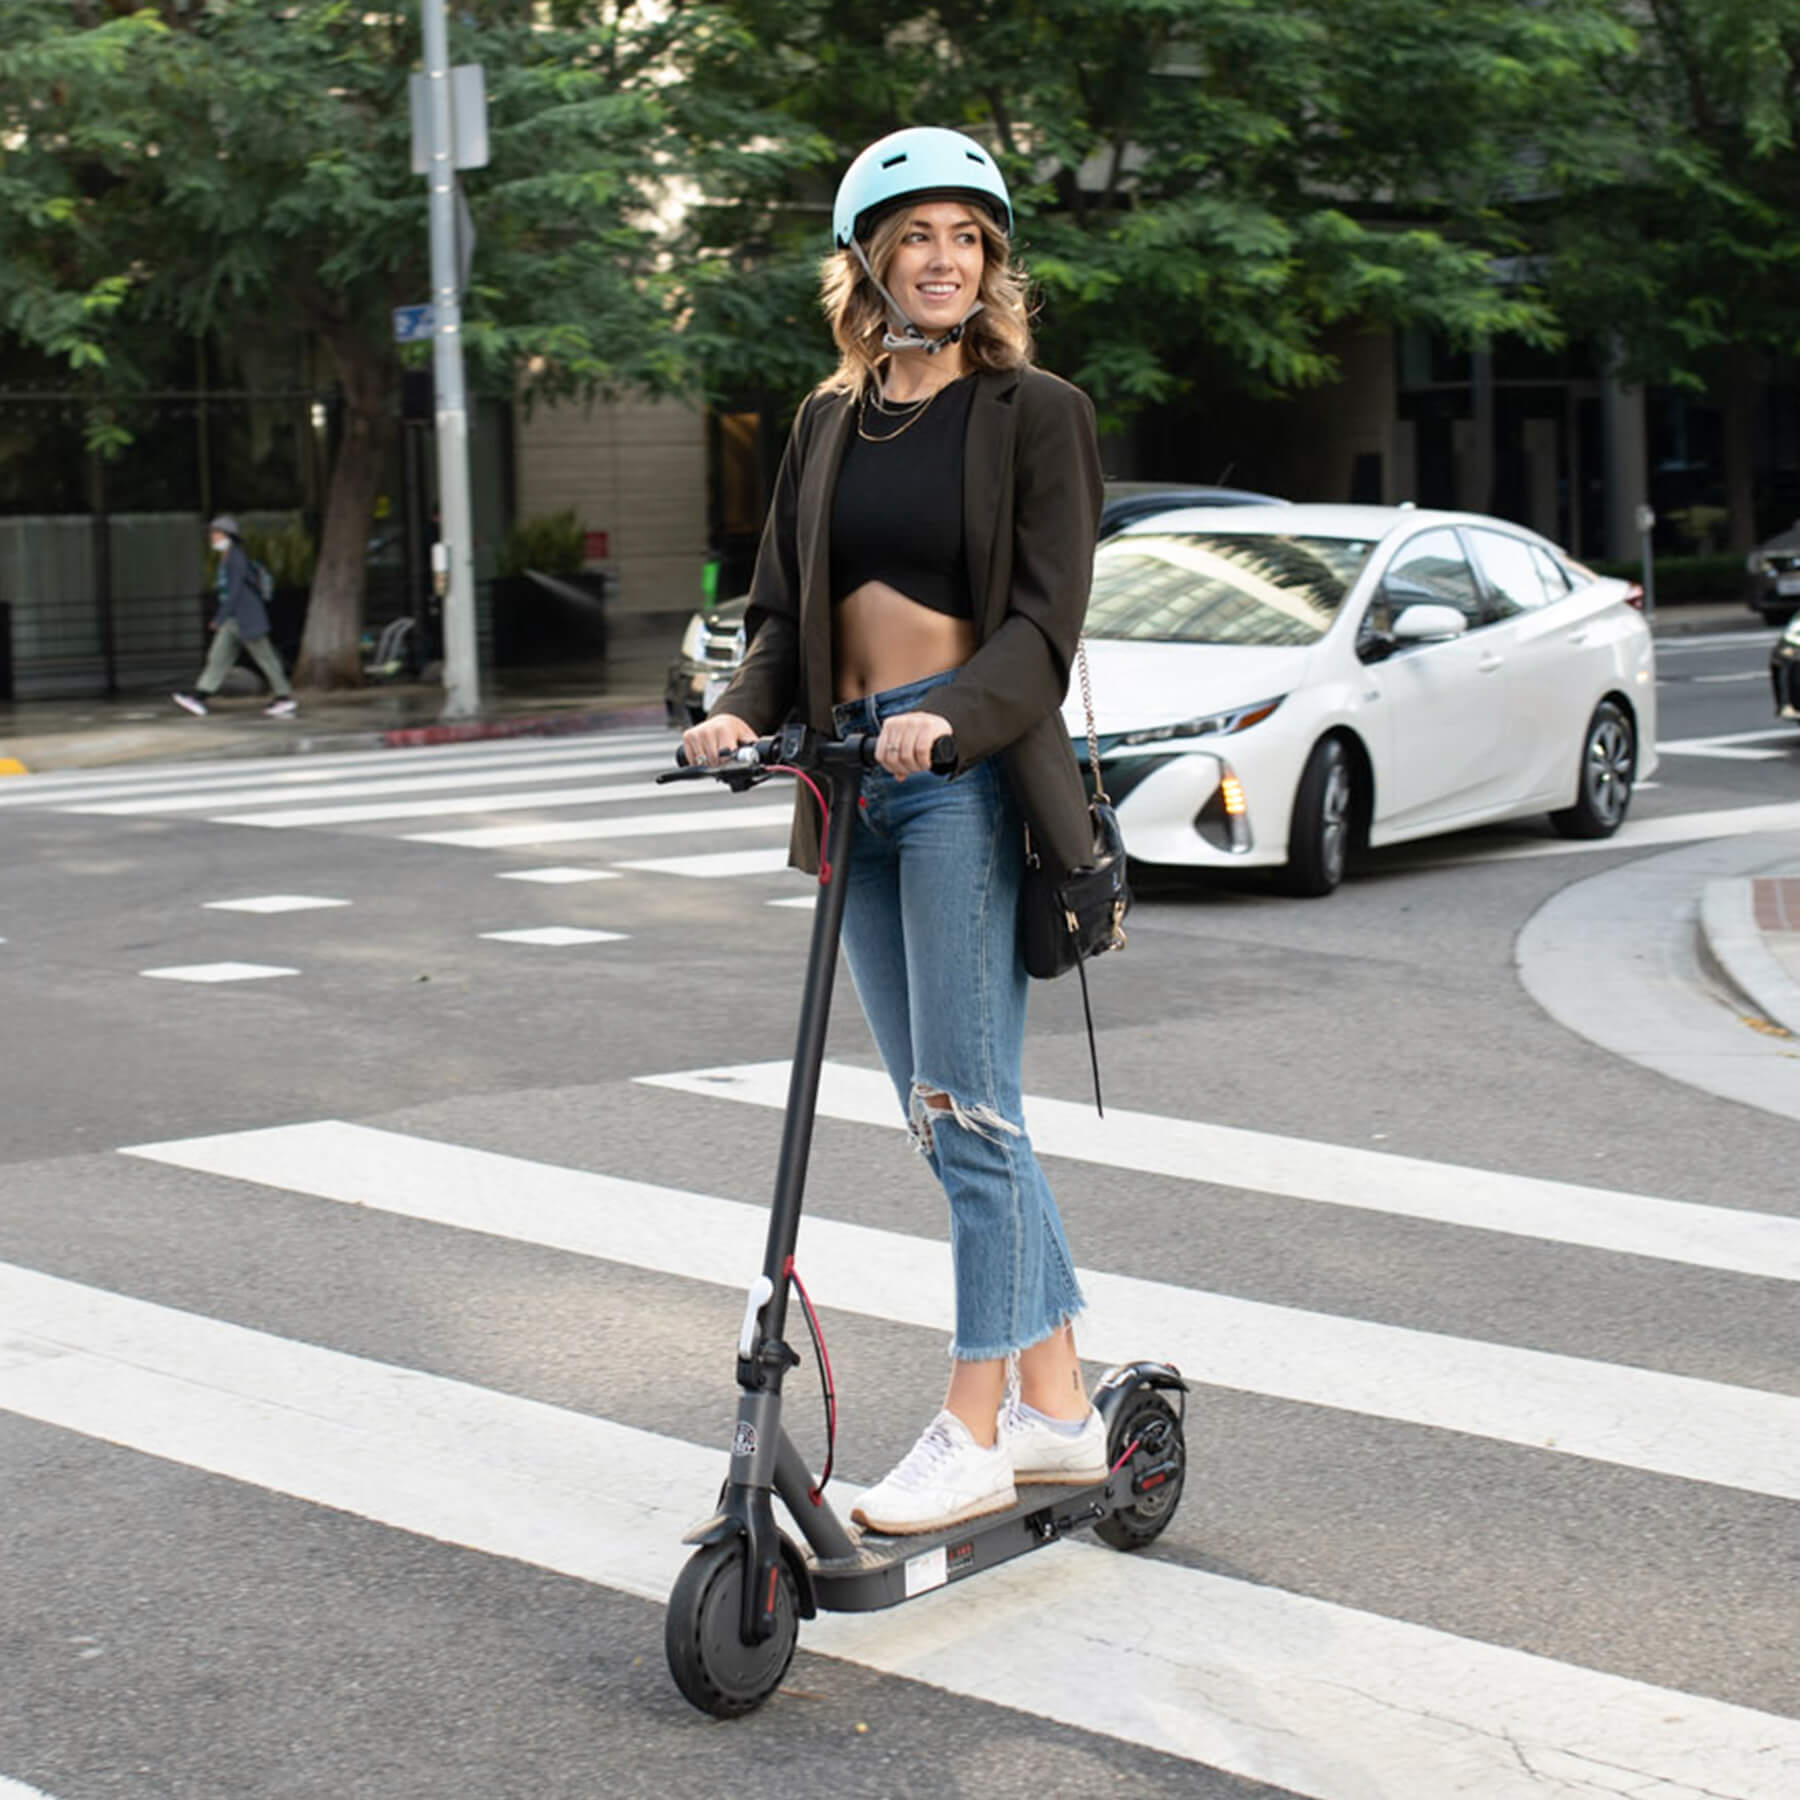 Hiboy Scooter Not Working